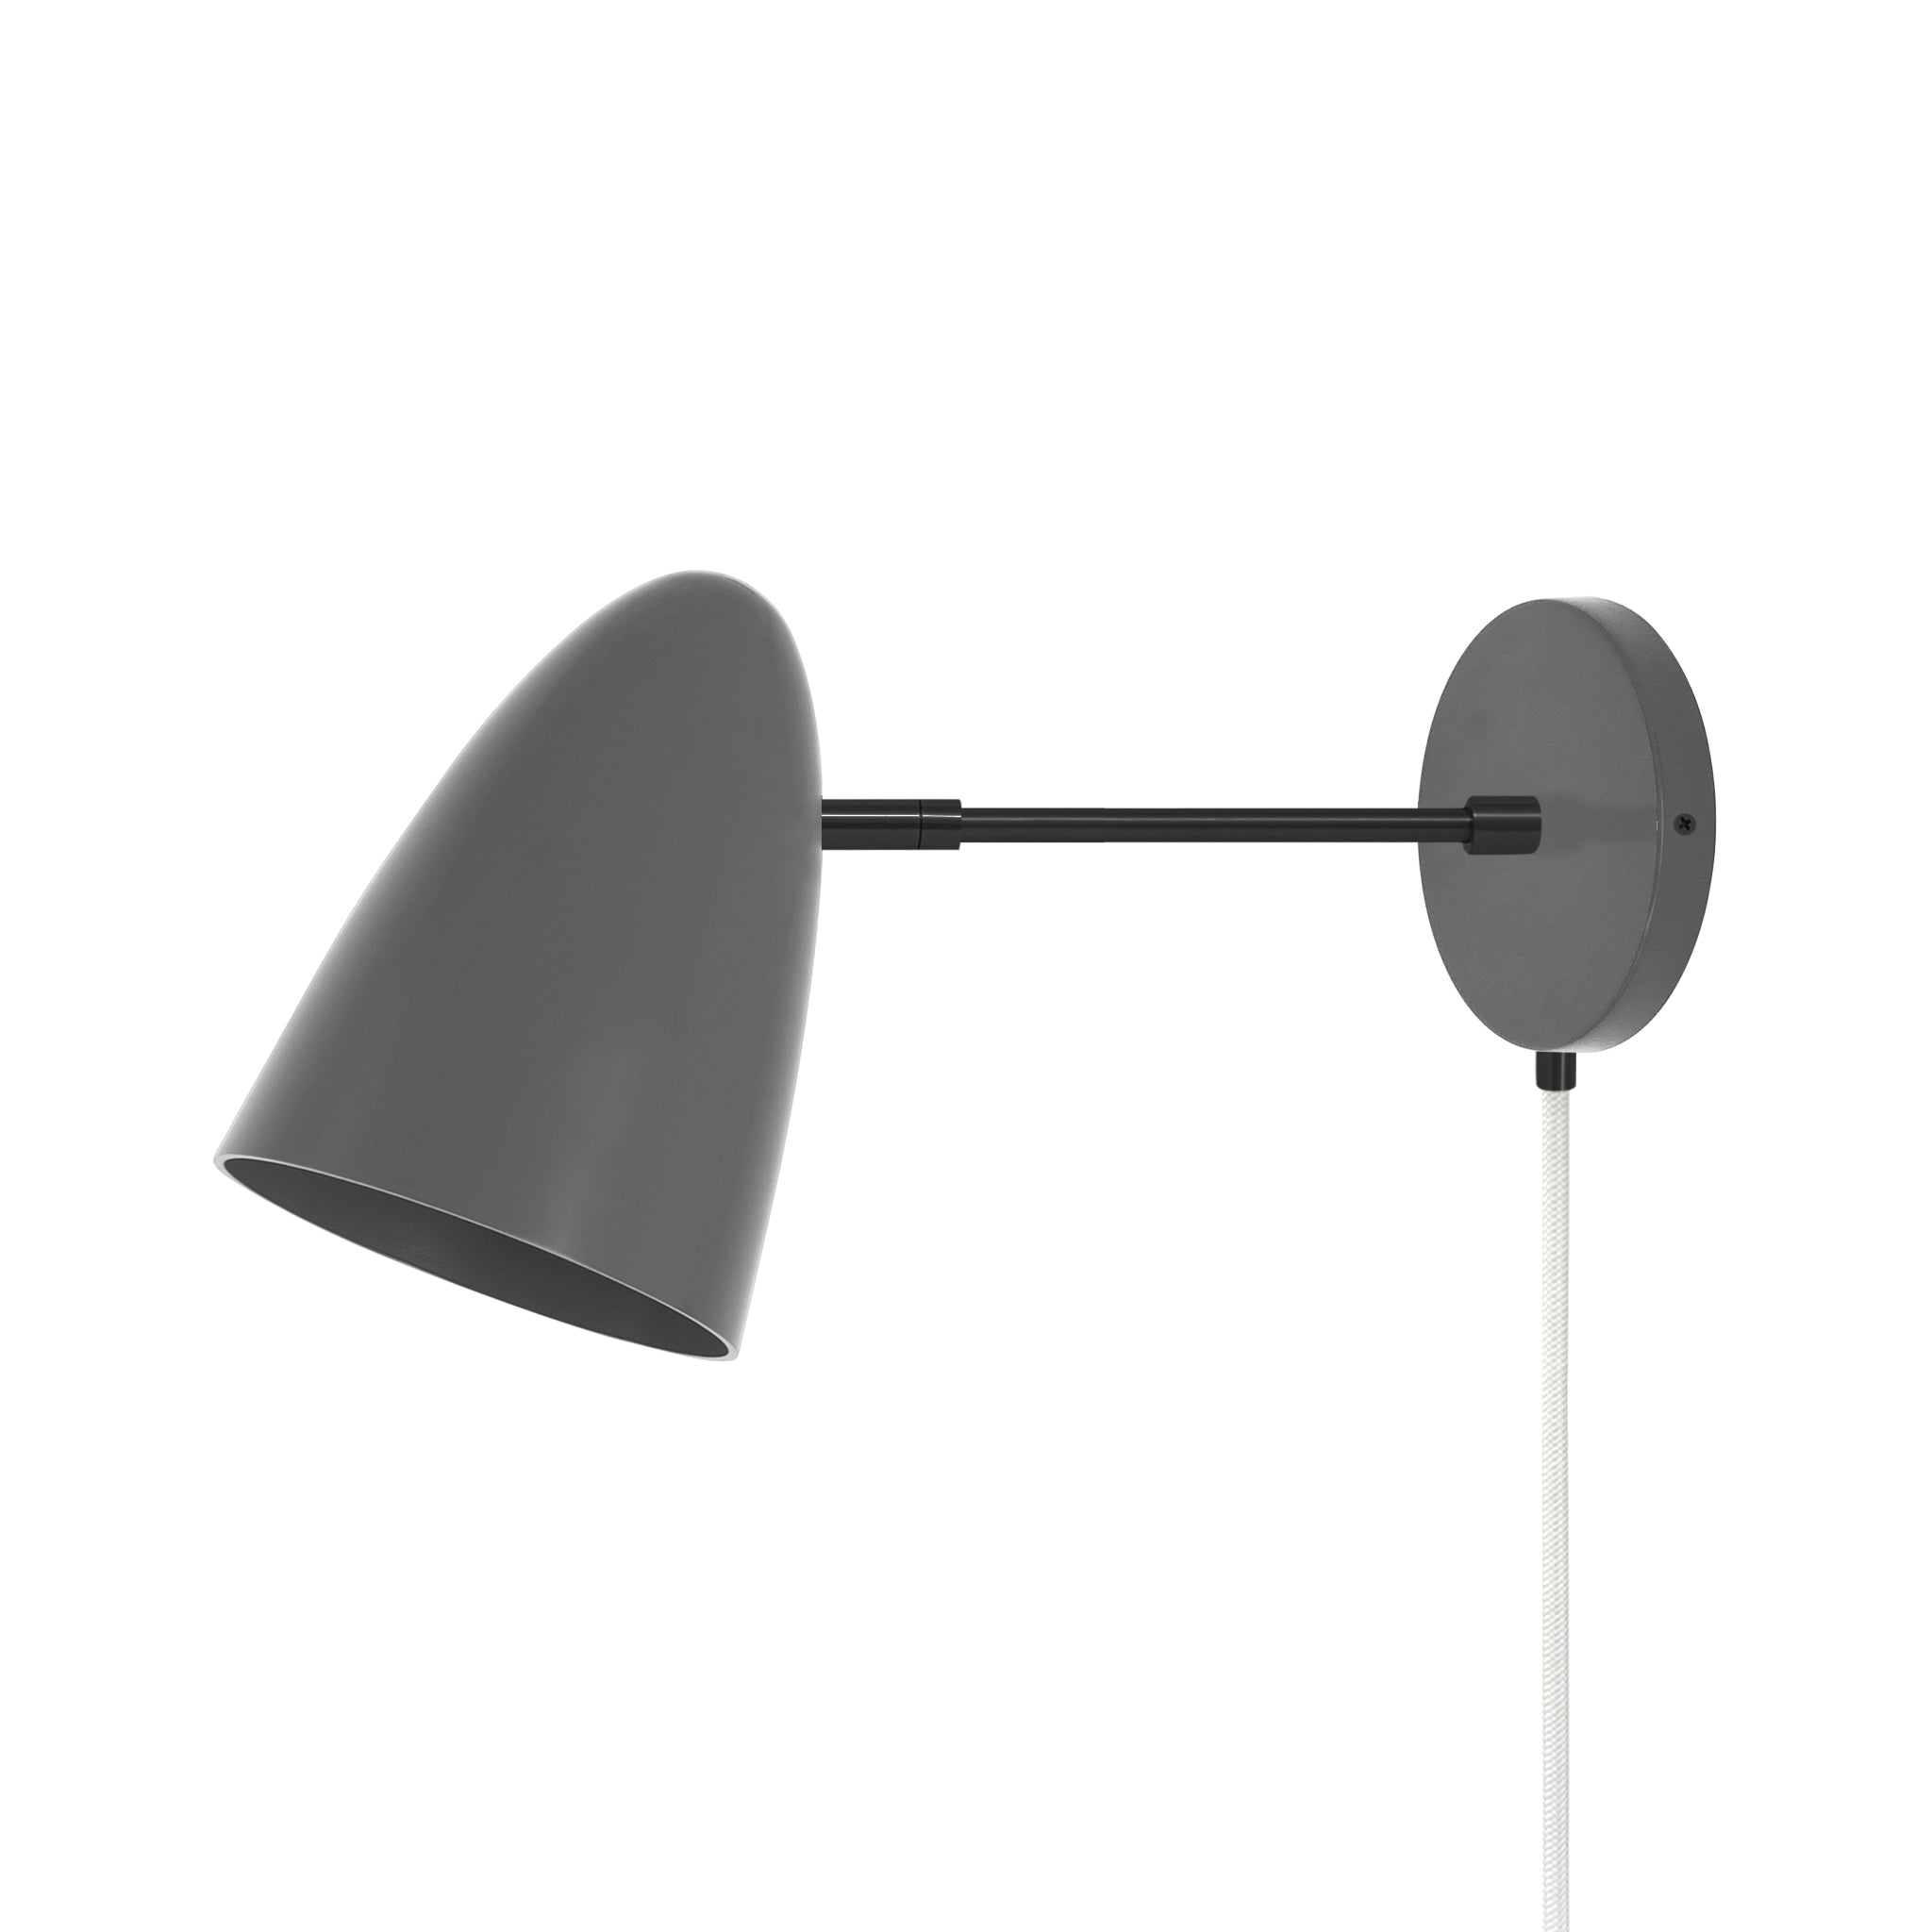 Black and charcoal color Boom plug-in sconce 6" arm Dutton Brown lighting